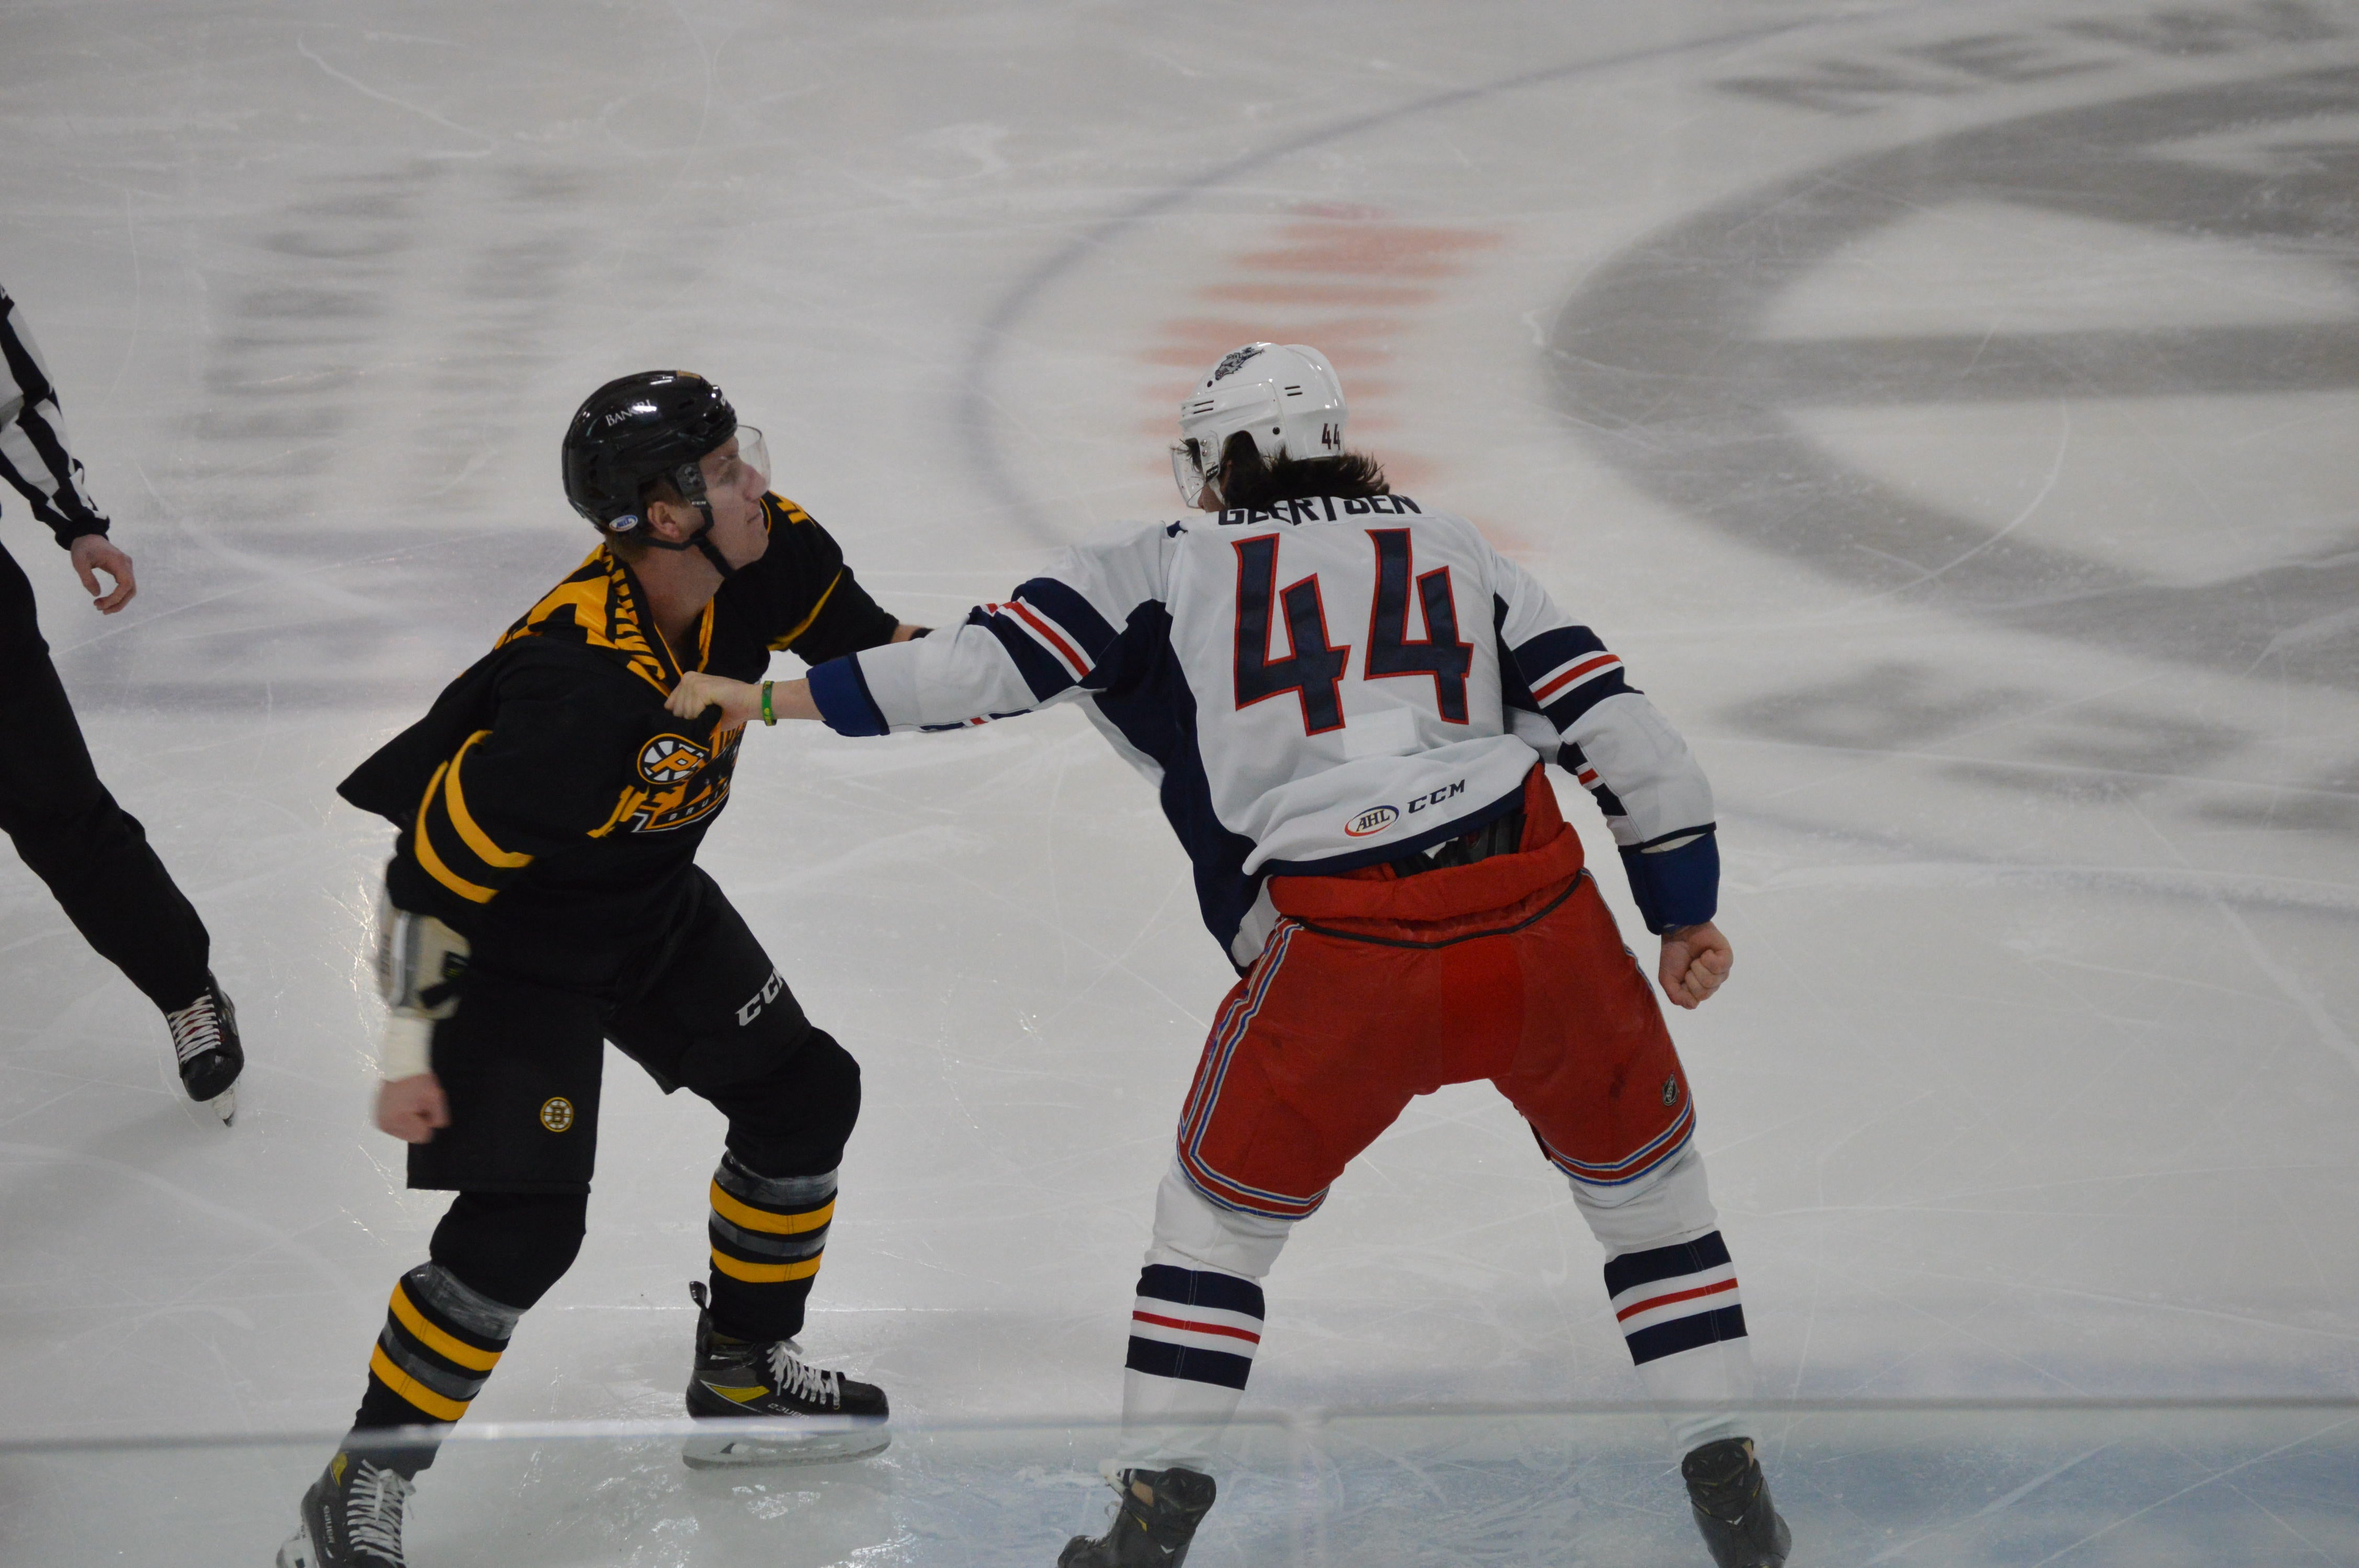 P-BRUINS FALL TO HARTFORD WOLF PACK IN OVERTIME, 3-2